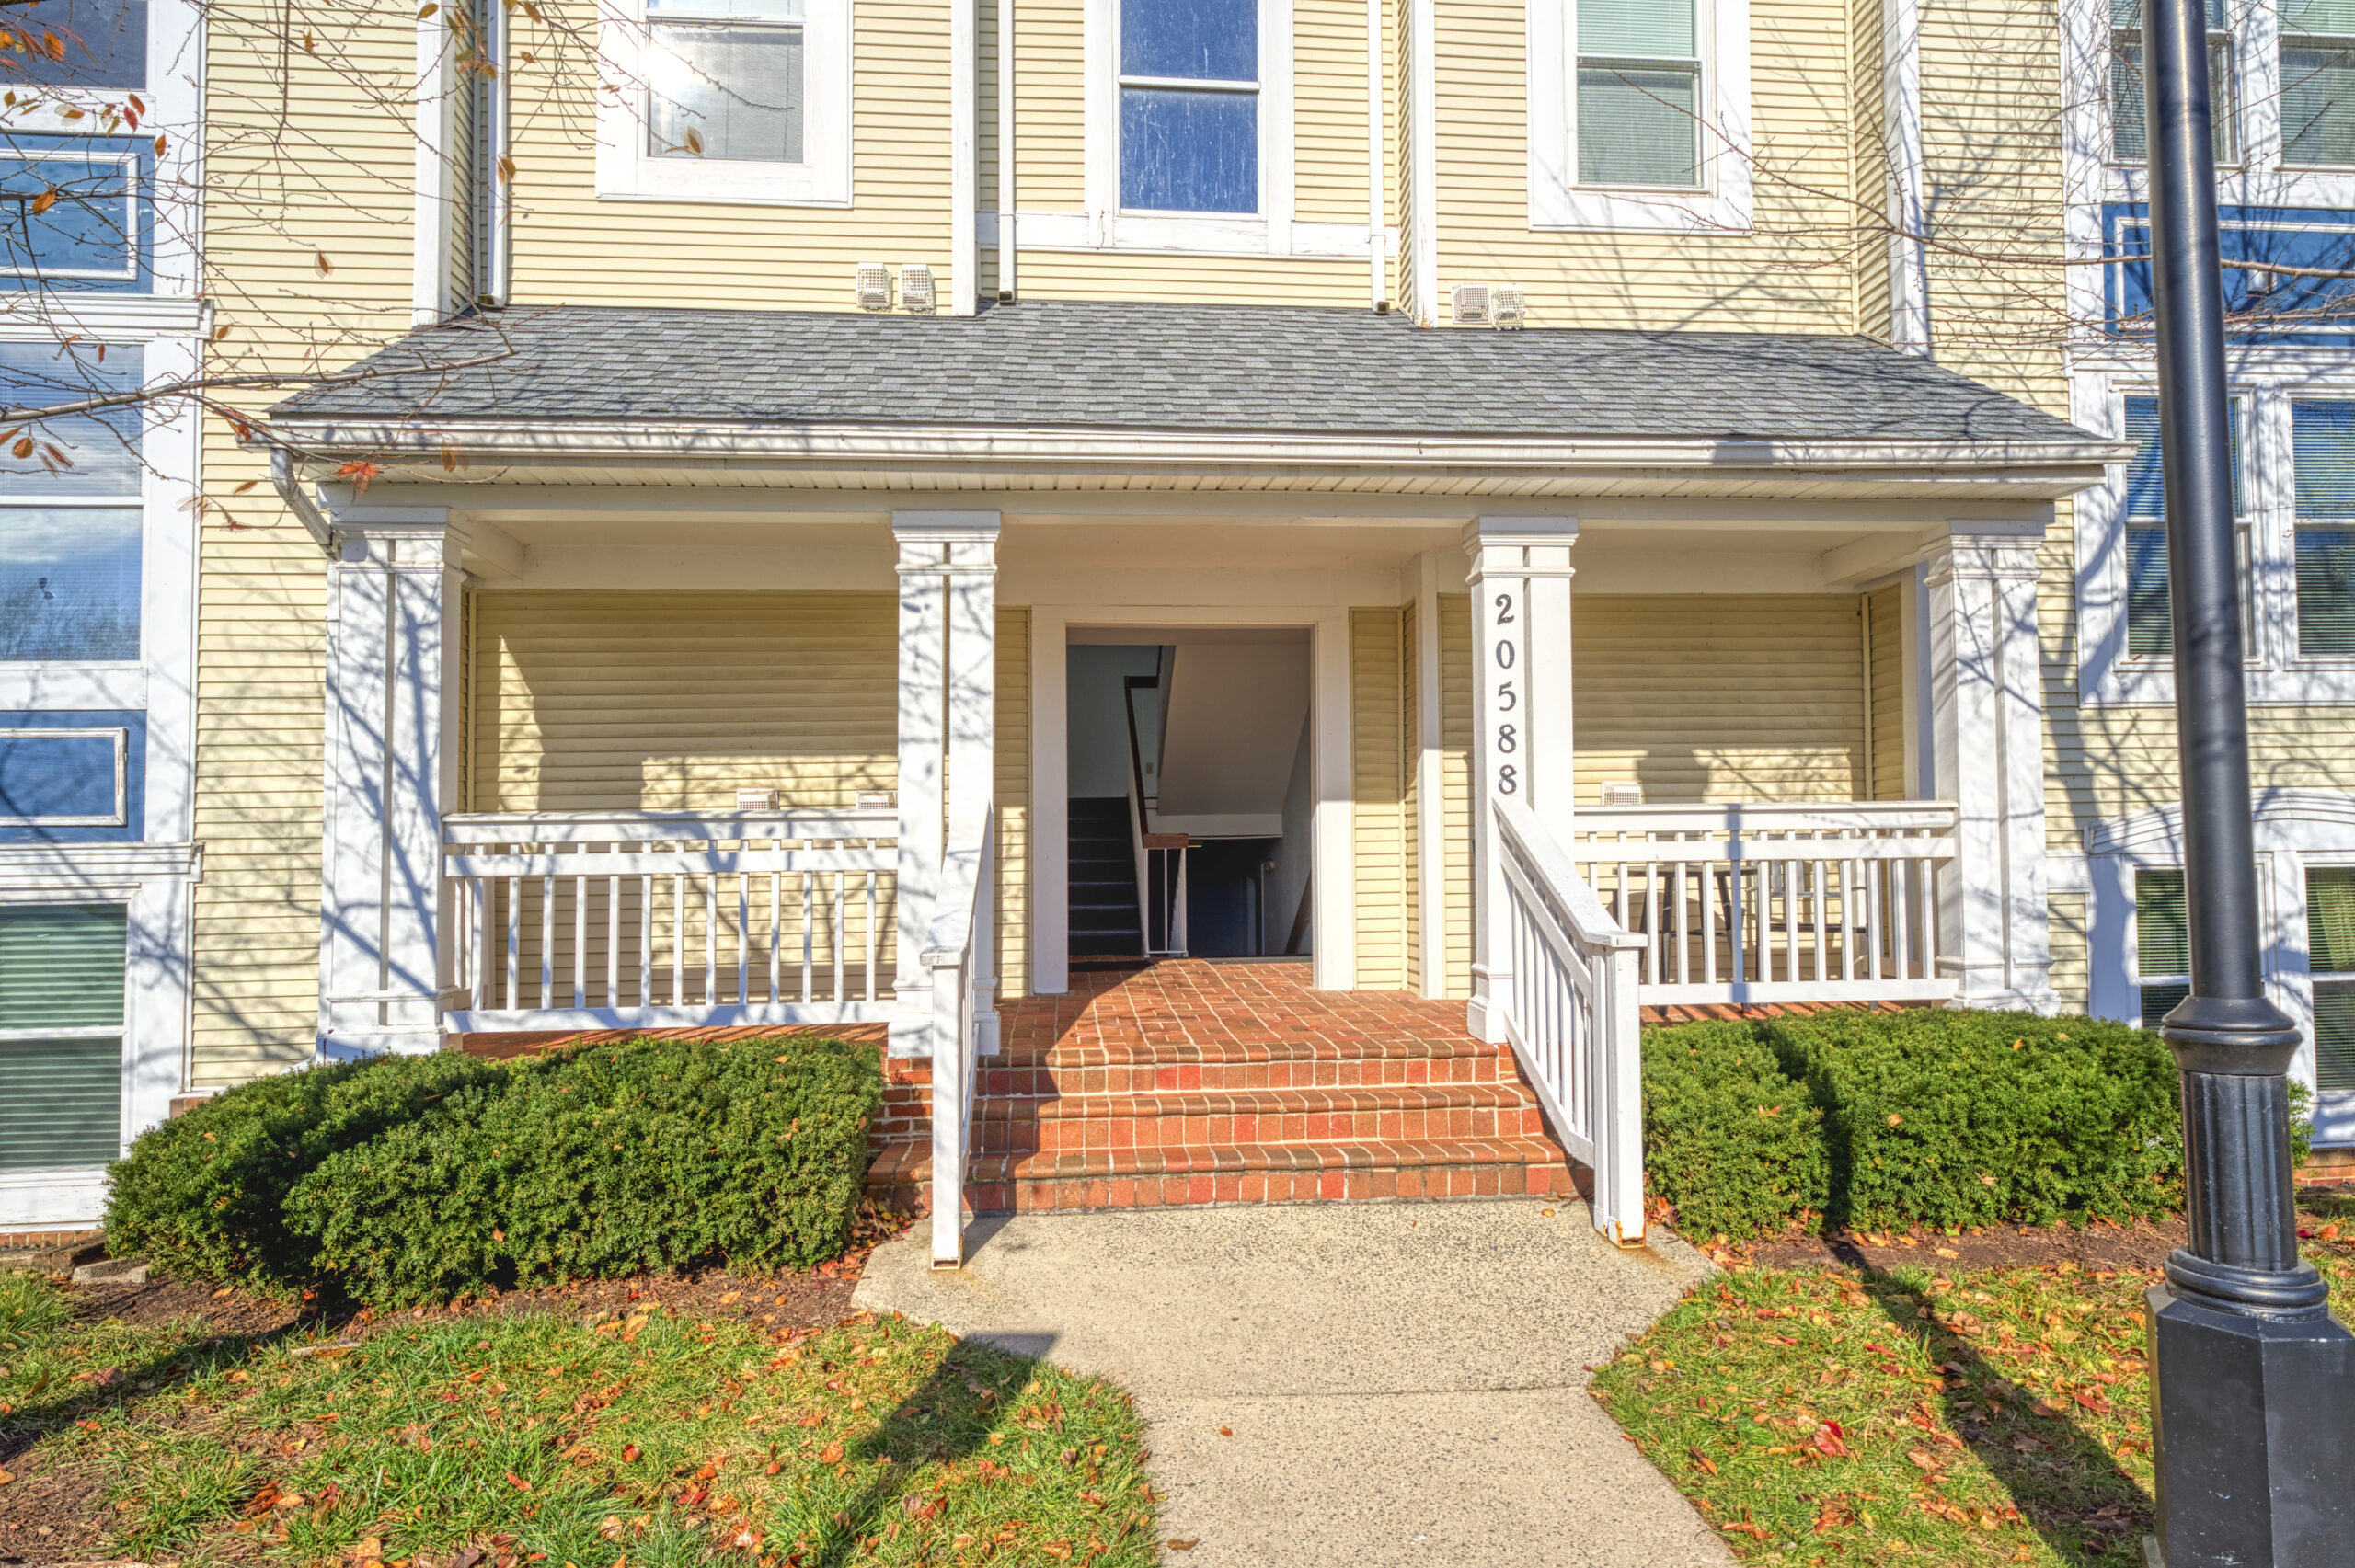 Professional exterior photo of 20588 Cornstalk Ter Unit 101 - Showing the entrance to the condo building with brick front steps and an inviting covered porch.